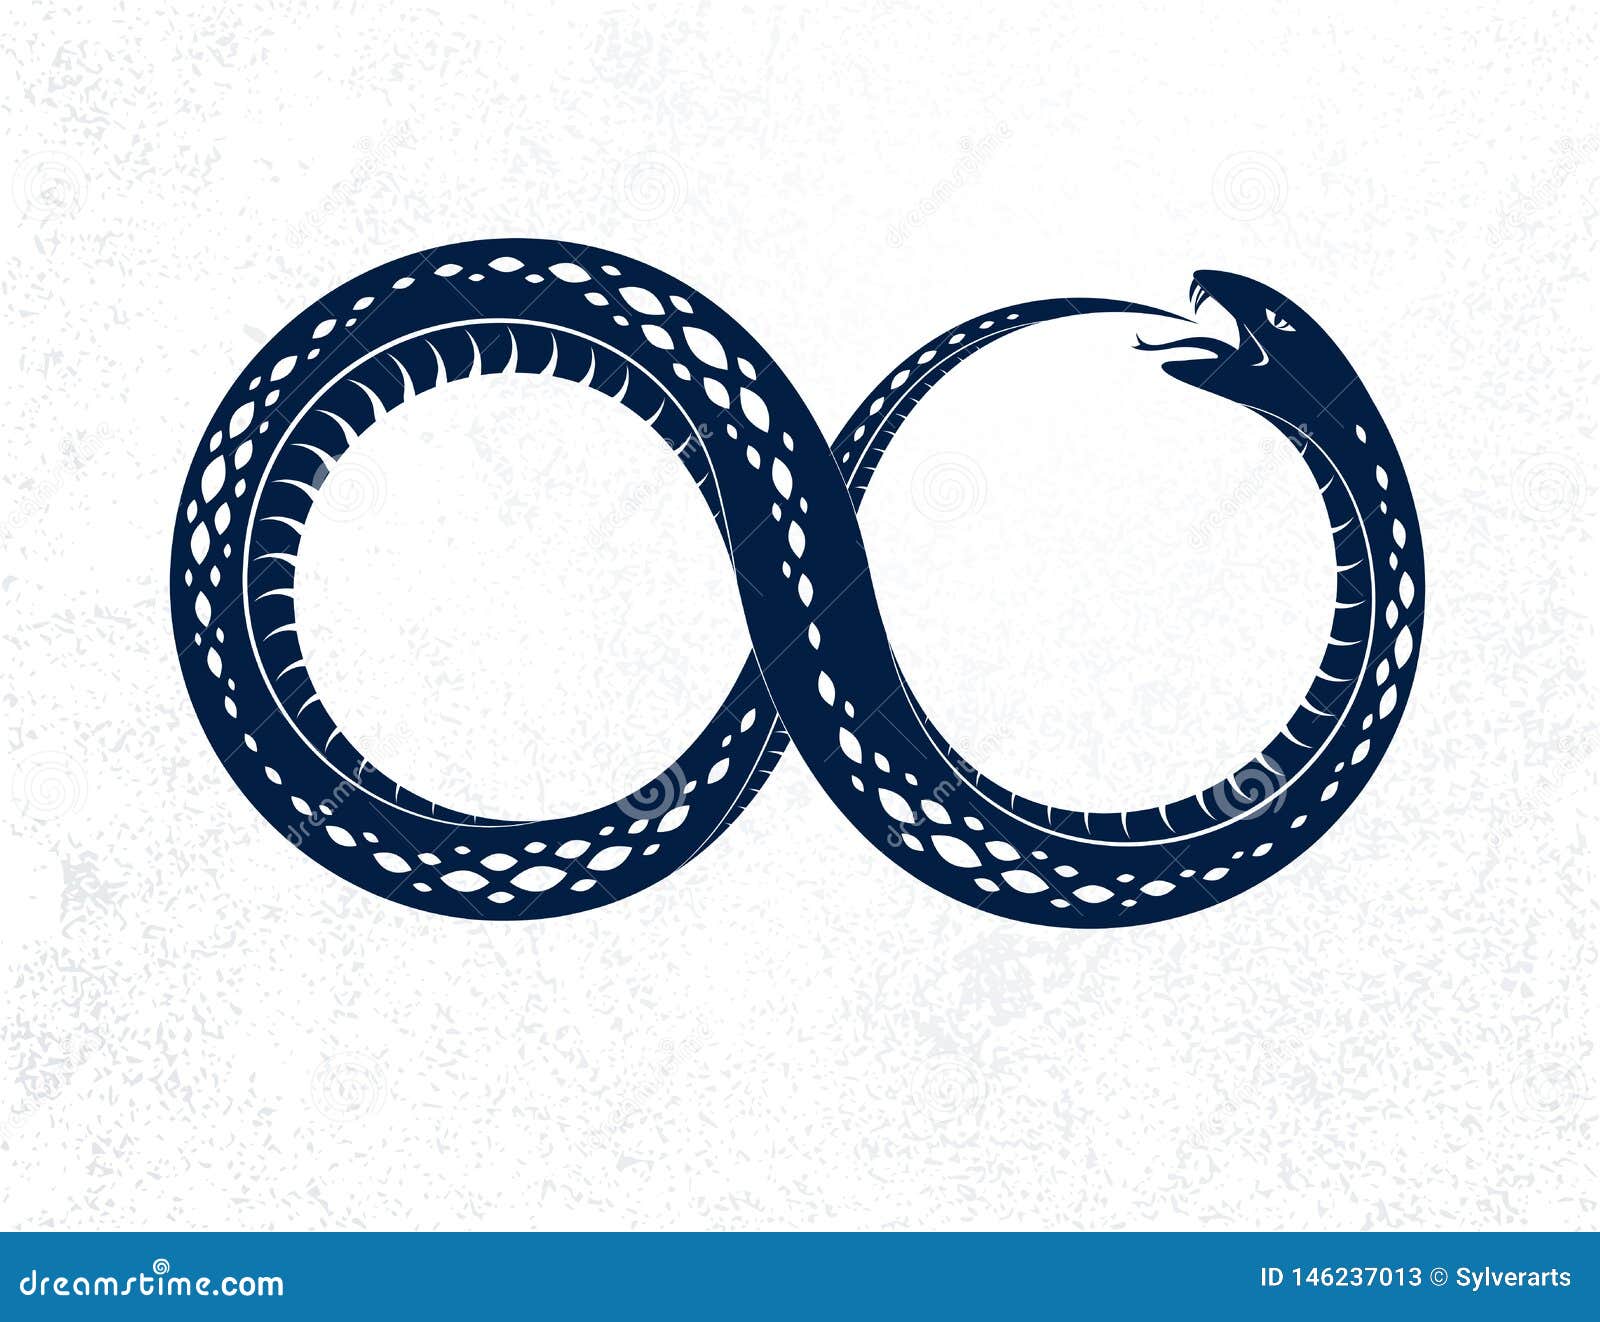 The Snake Eates Its Own Tail In The Form Of A Sign Of Infinity Ouroboros  Symbol Tattoo Design Vector Illustration Isolated On A White Background  Royalty Free SVG Cliparts Vectors And Stock